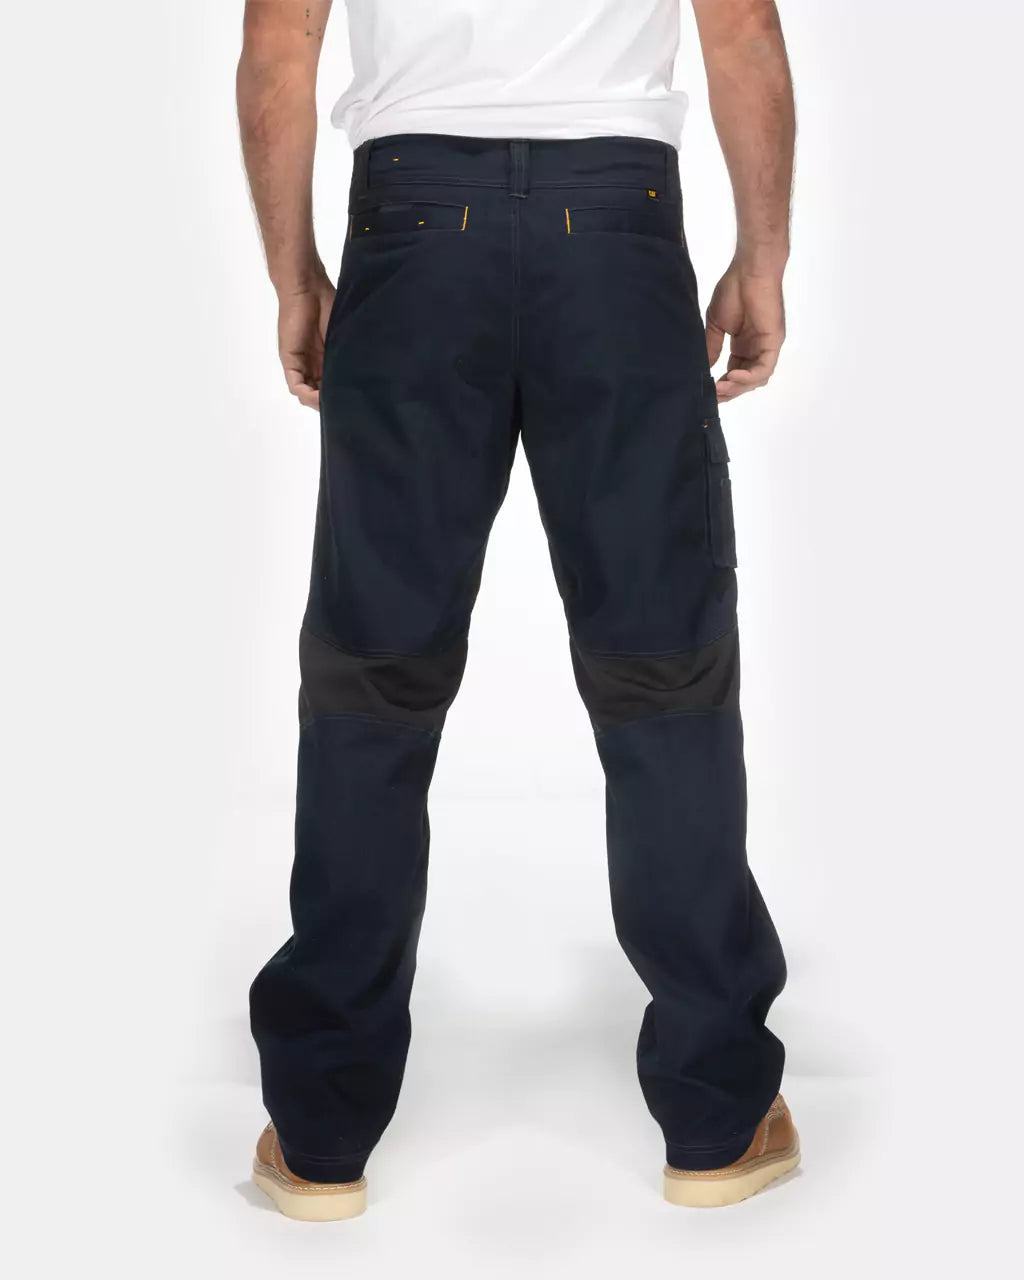 Men's 30 in. x 34 in. Khaki Cotton/Polyester/Spandex Flex Work Pants with 6  Pockets